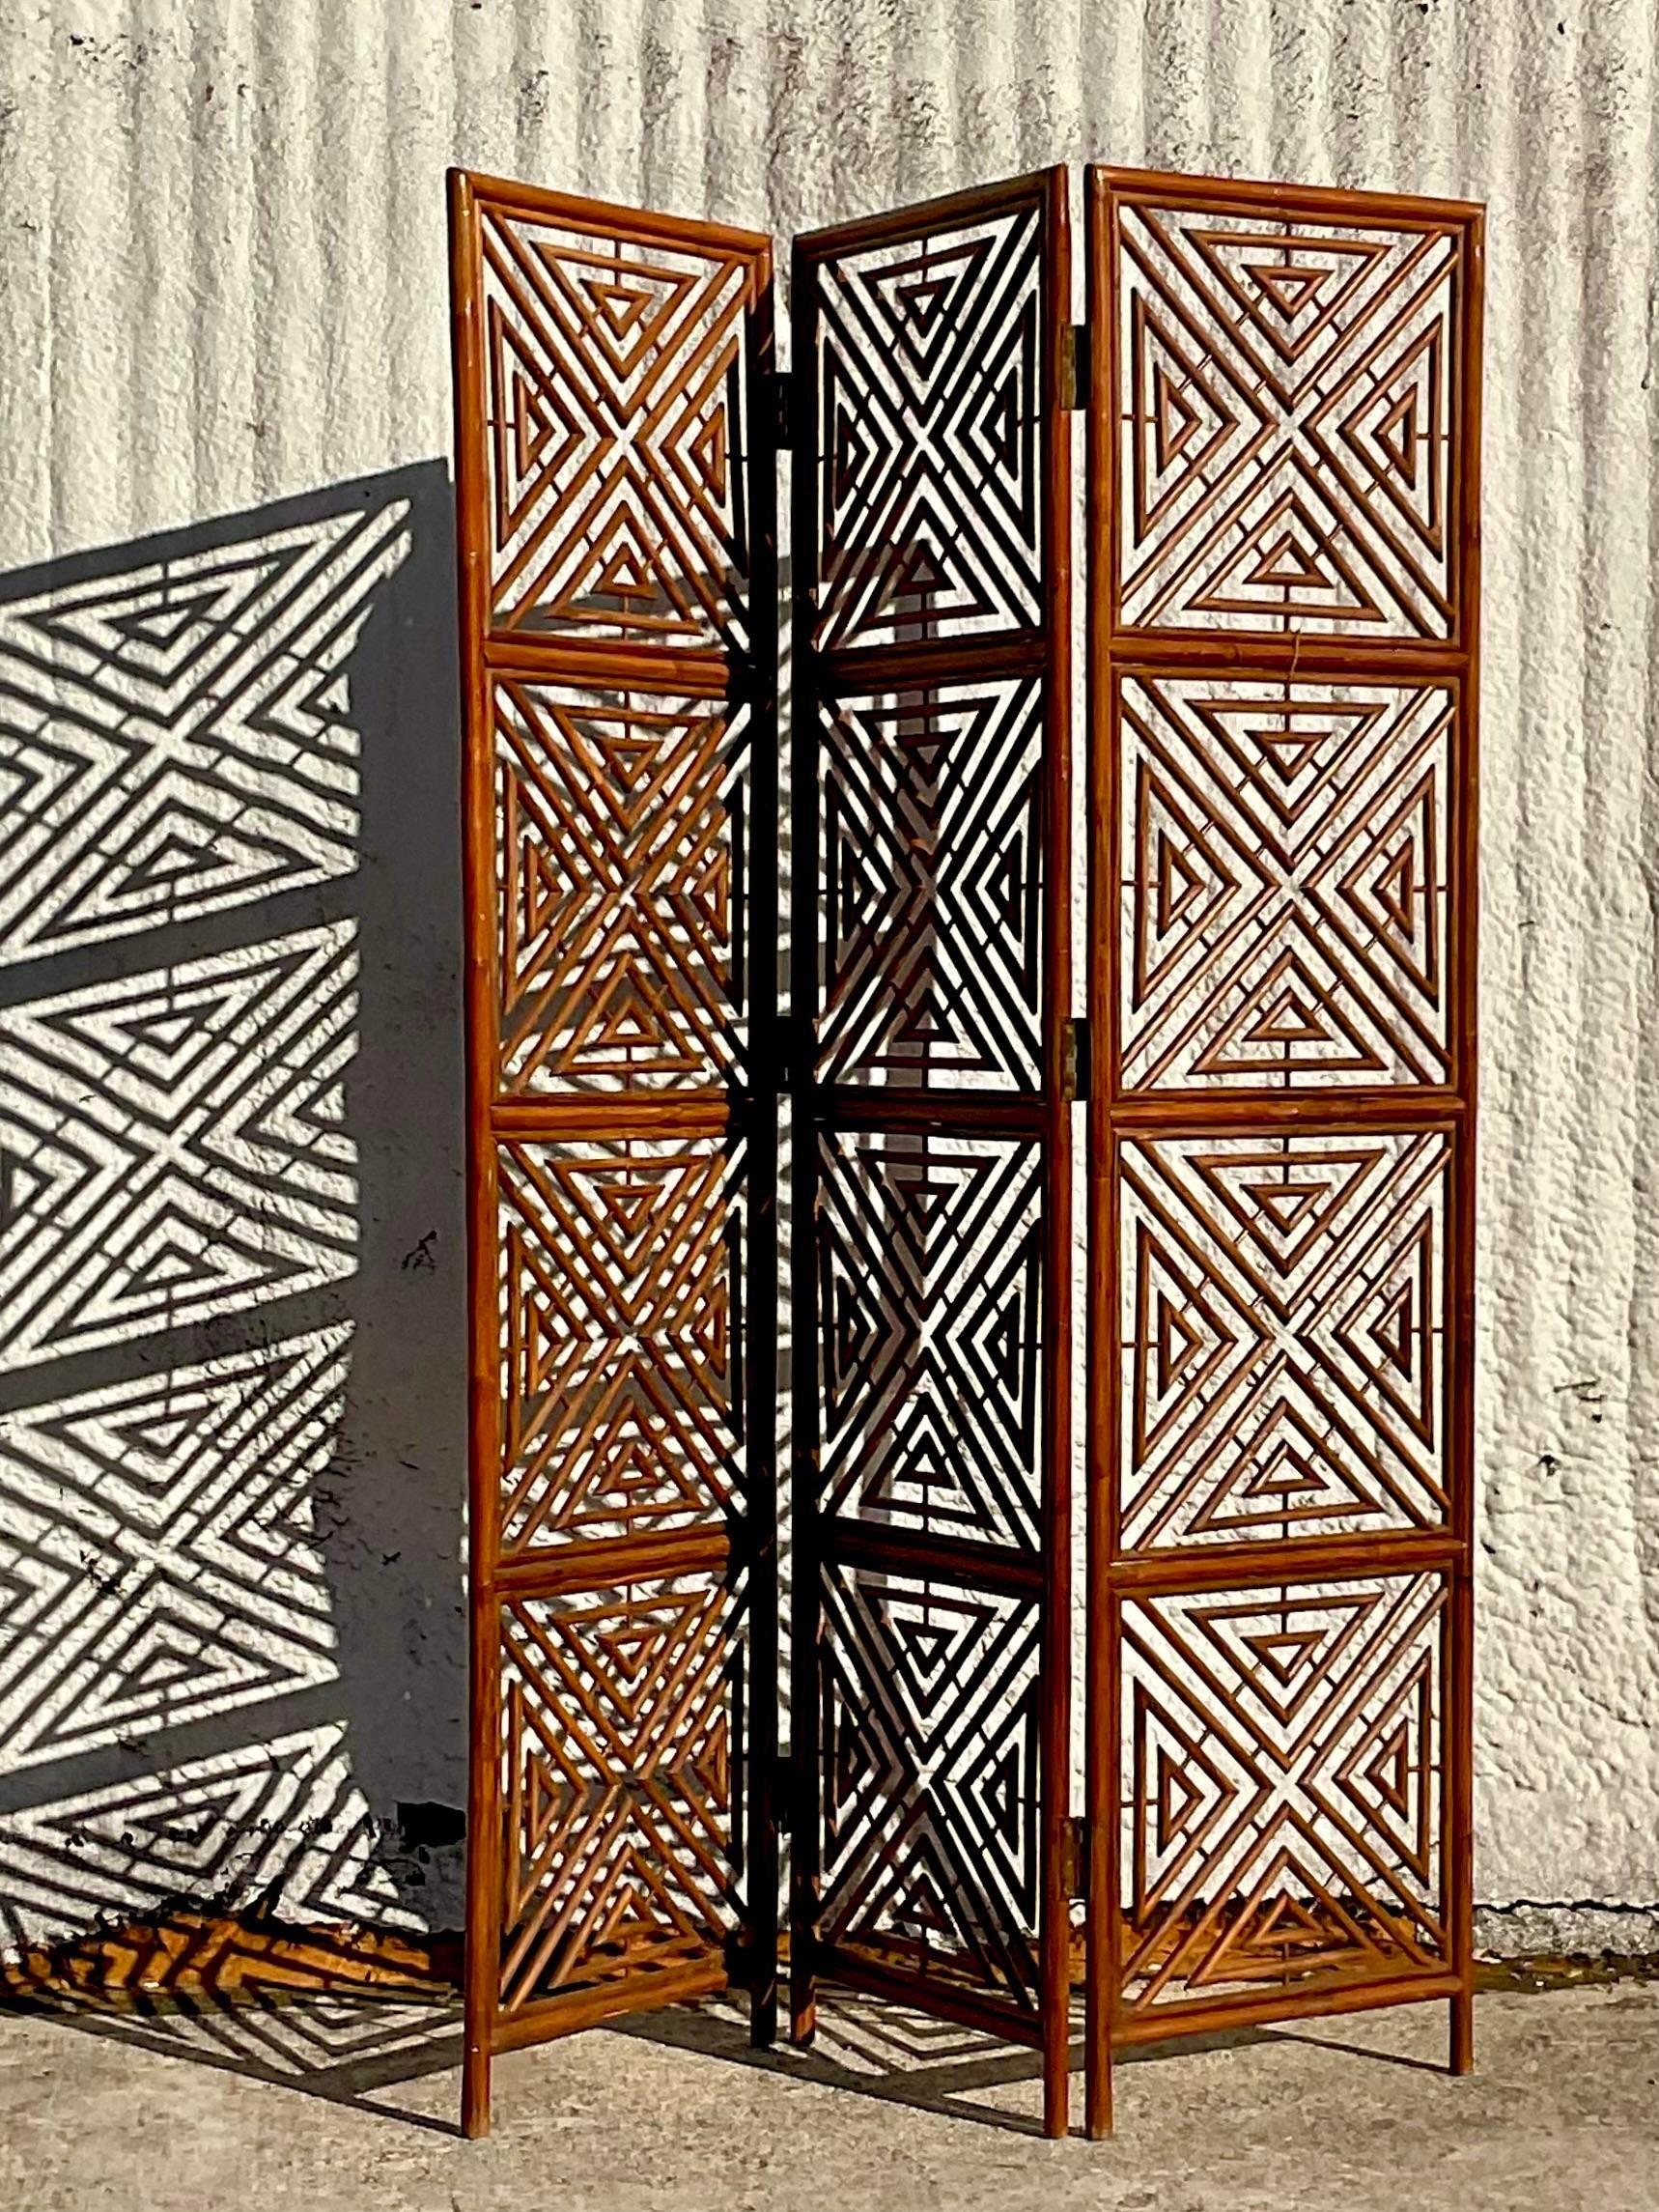 A fabulous vintage Boho folding screen. A chic rattan construction in a graphic square design. Acquired from a Palm Beach estate.